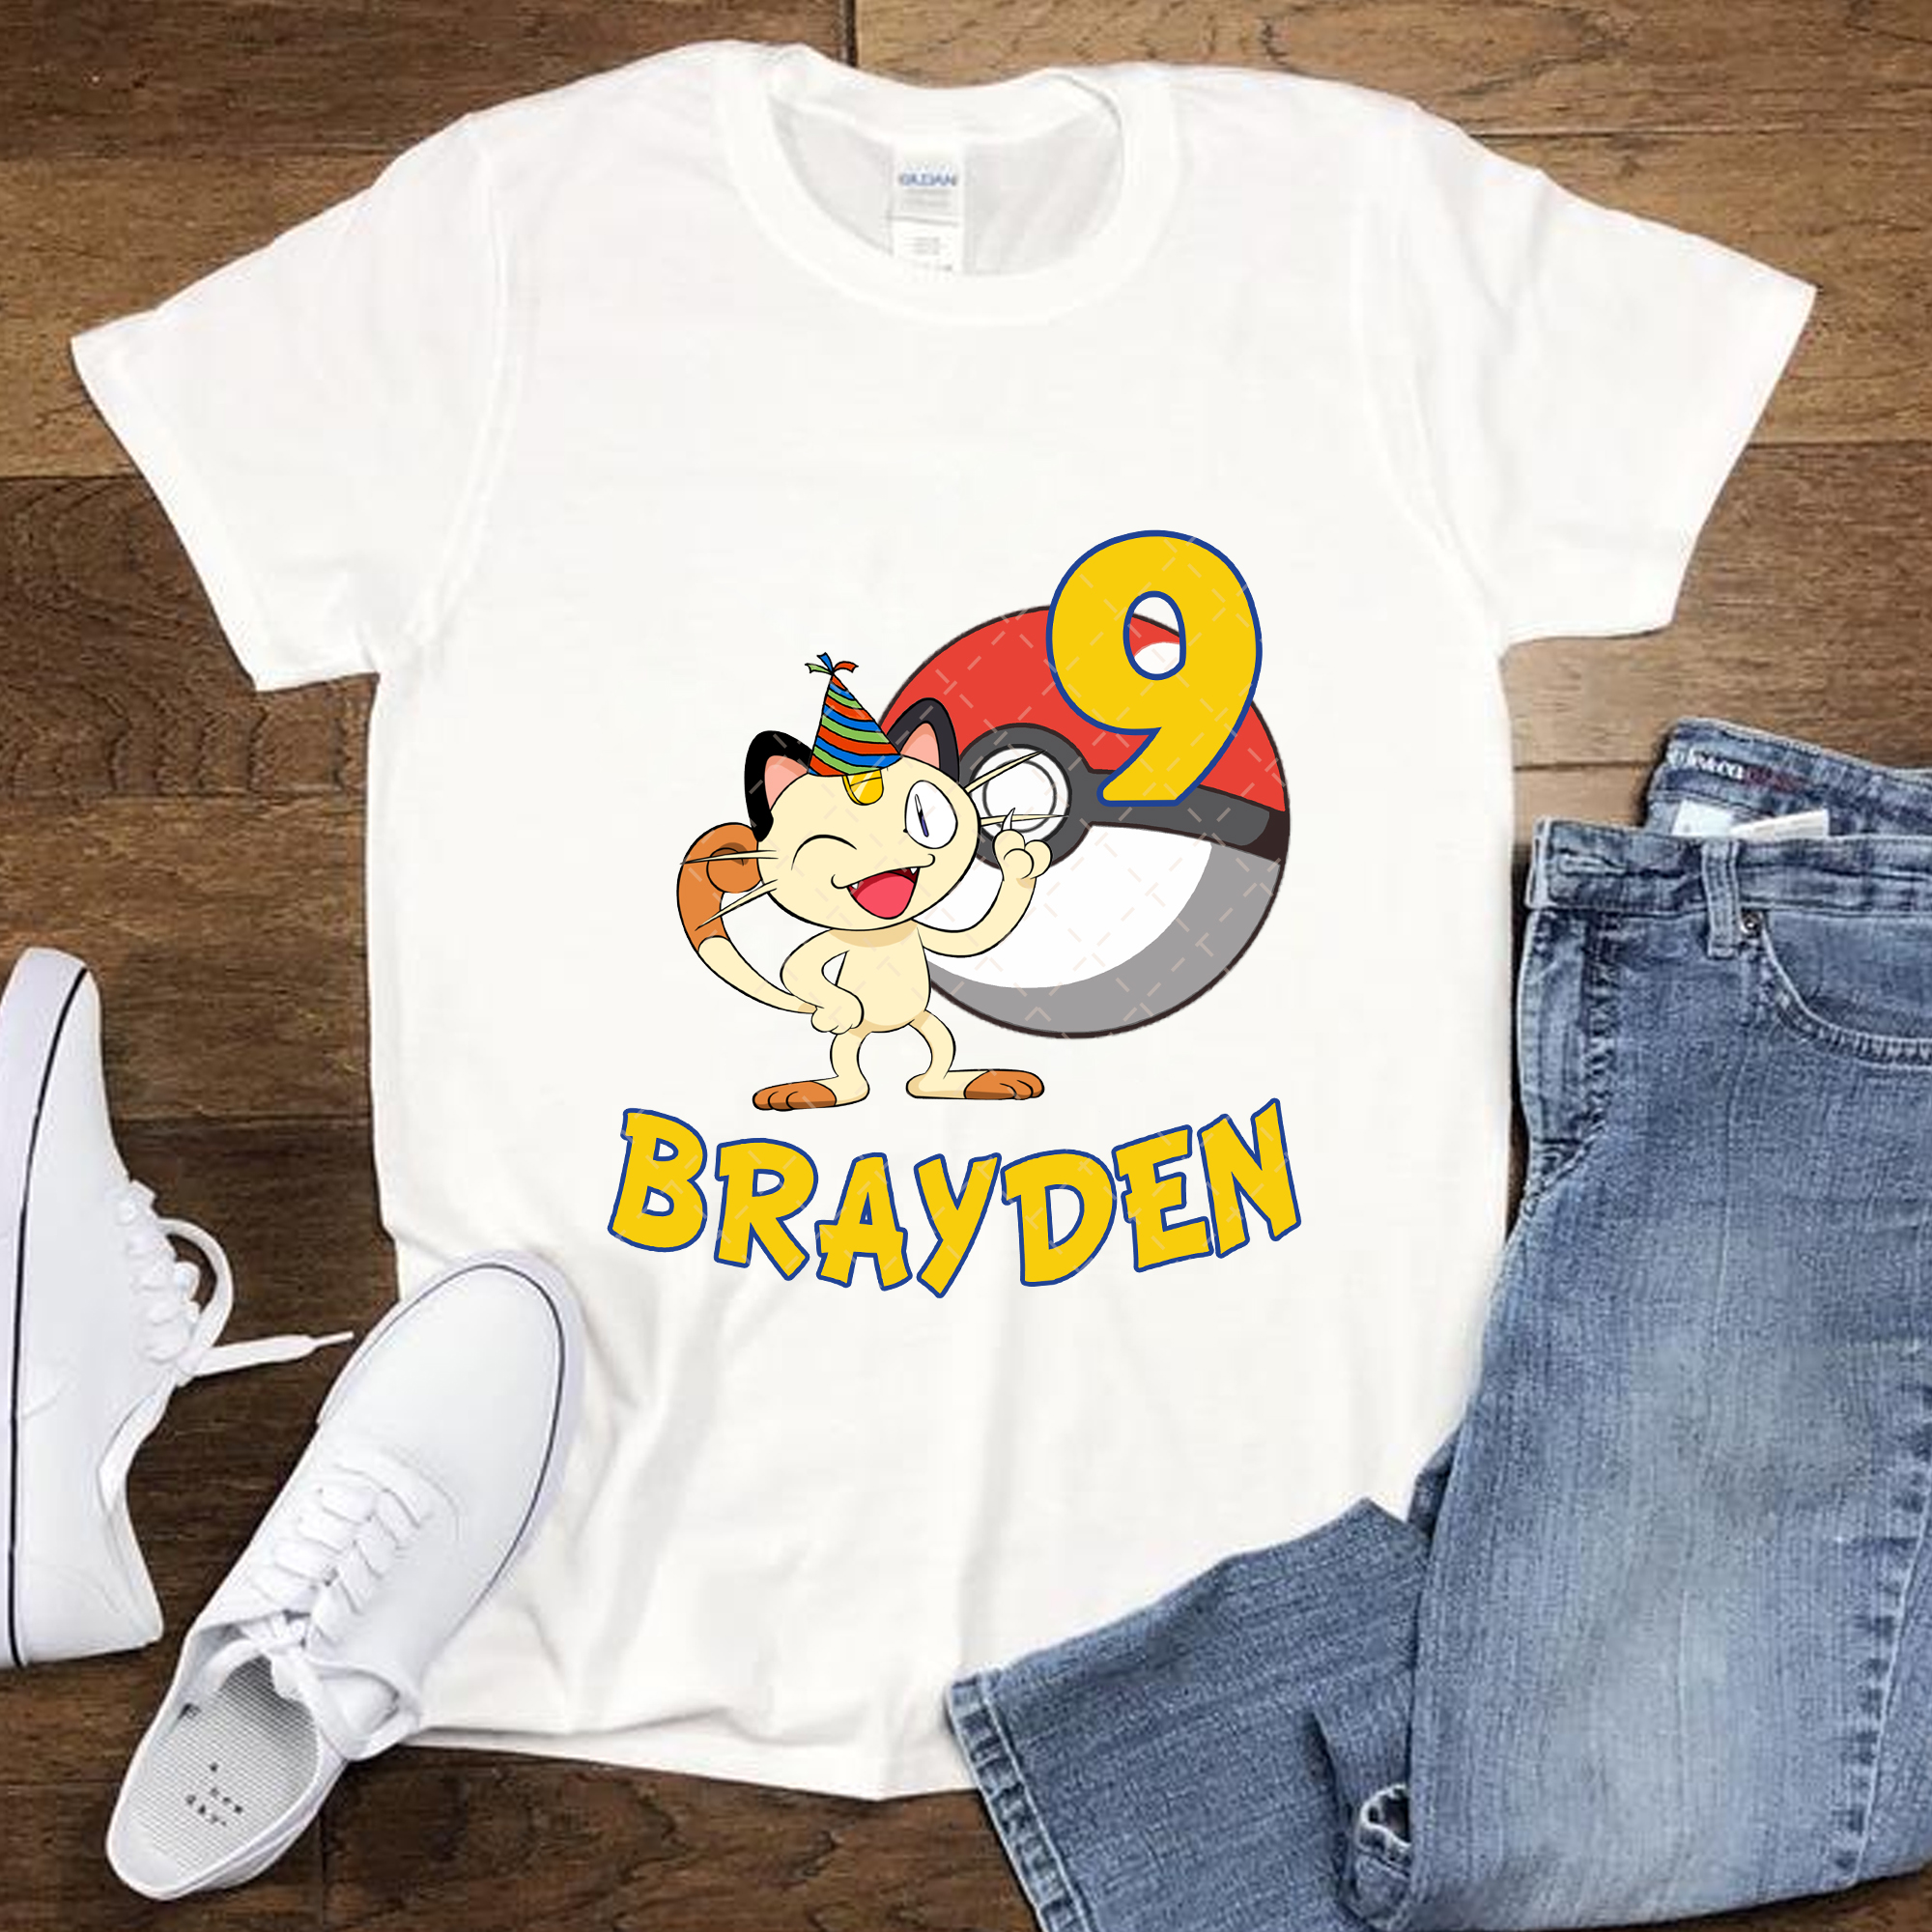 Meowth Pokemon Custom Birthday Party T-shirt, Personalized With Name And Age